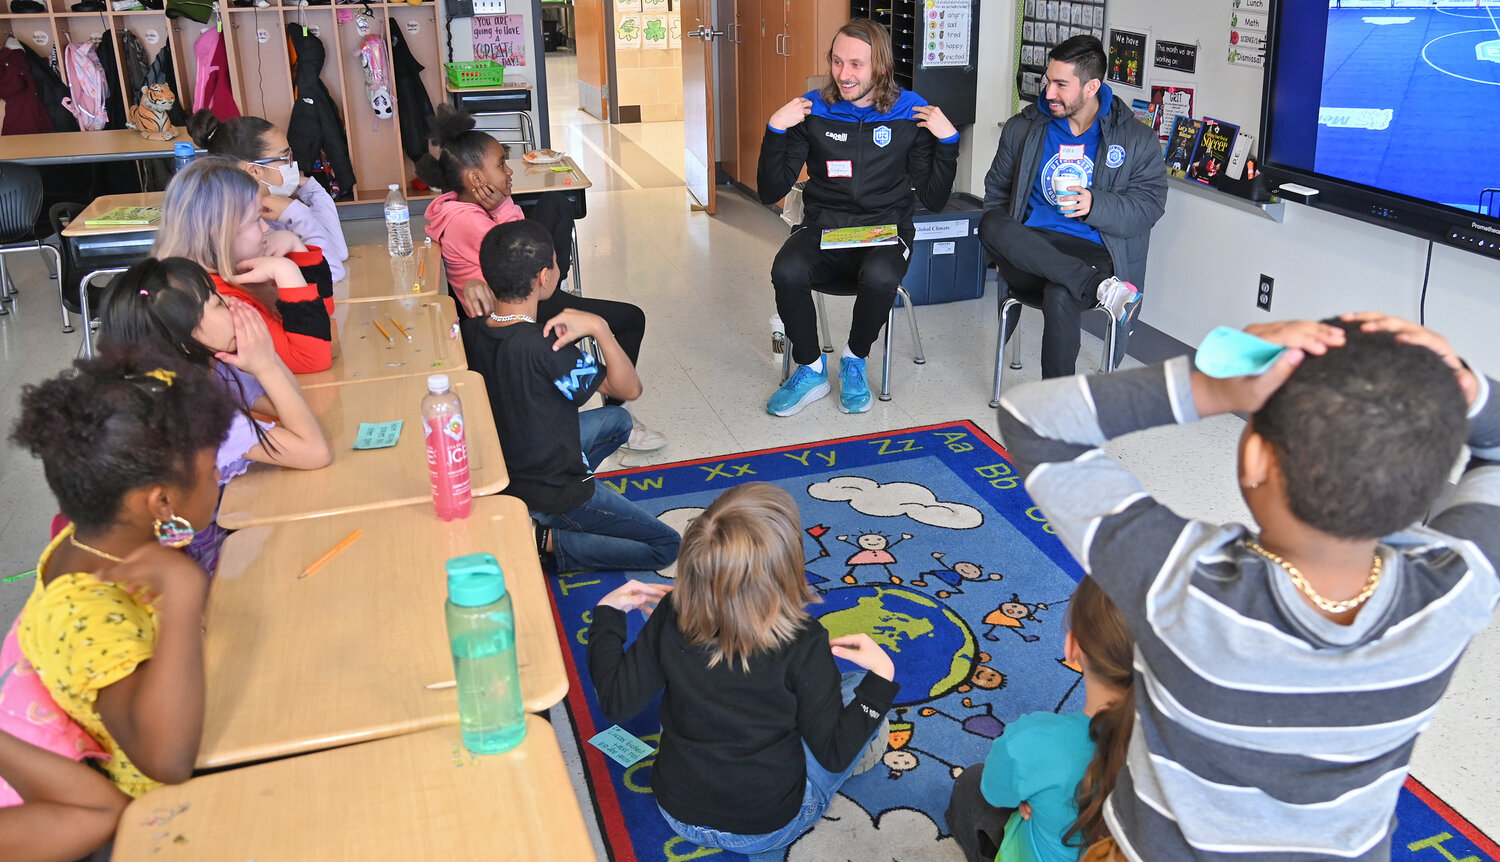 Utica City Football player Timmy Goldman plays Simon Says with the third grade class of Jordan Penc before reading the book “Game Time” Friday, March 24 during the Community Reader’s Day event at Kernan Elementary School in Utica. Helping him is teammate Rafa Godoi.